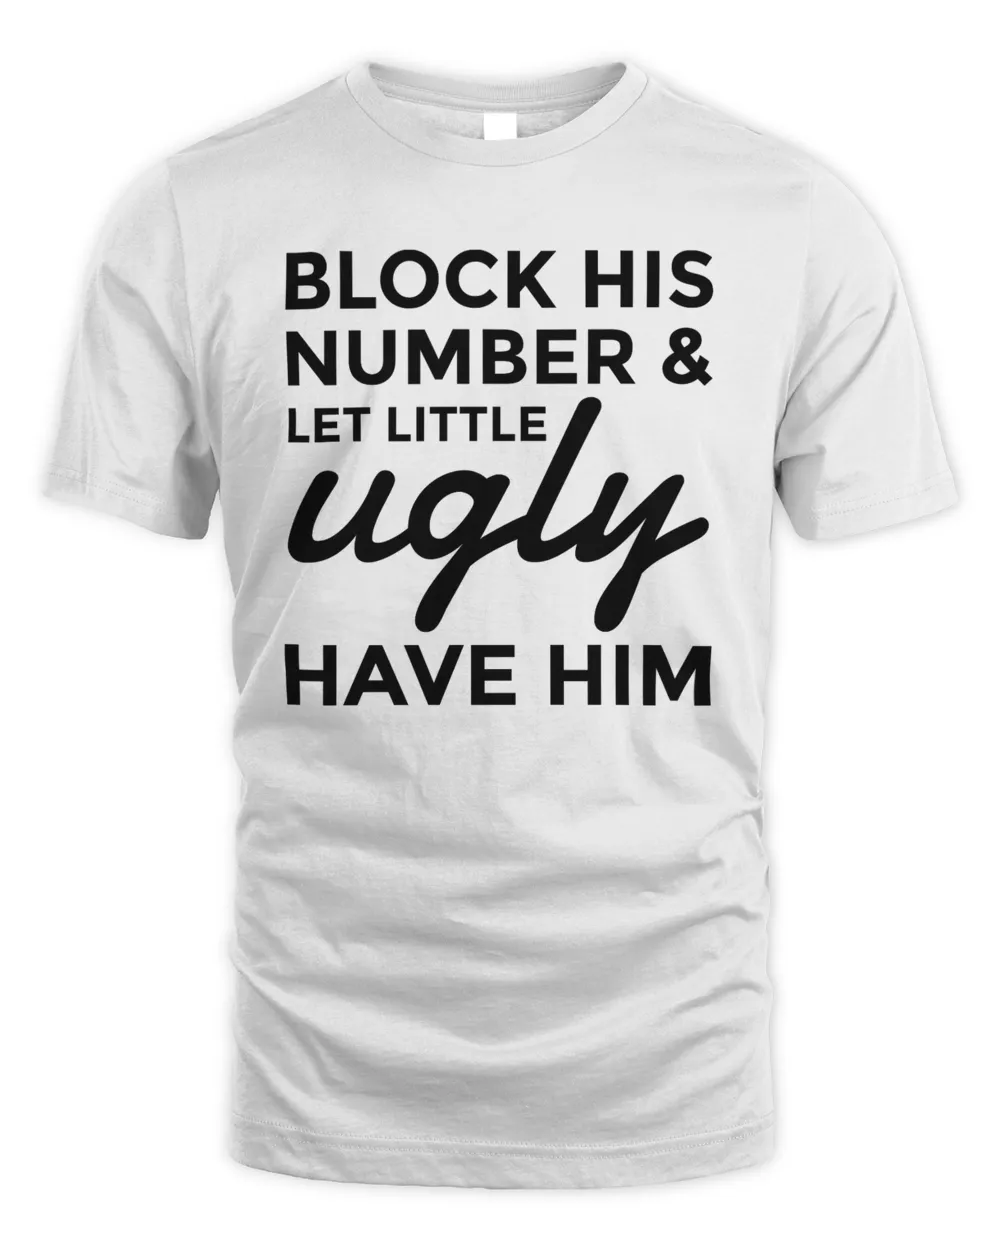 Block His Number And Let Little Ugly Have Him Shirt